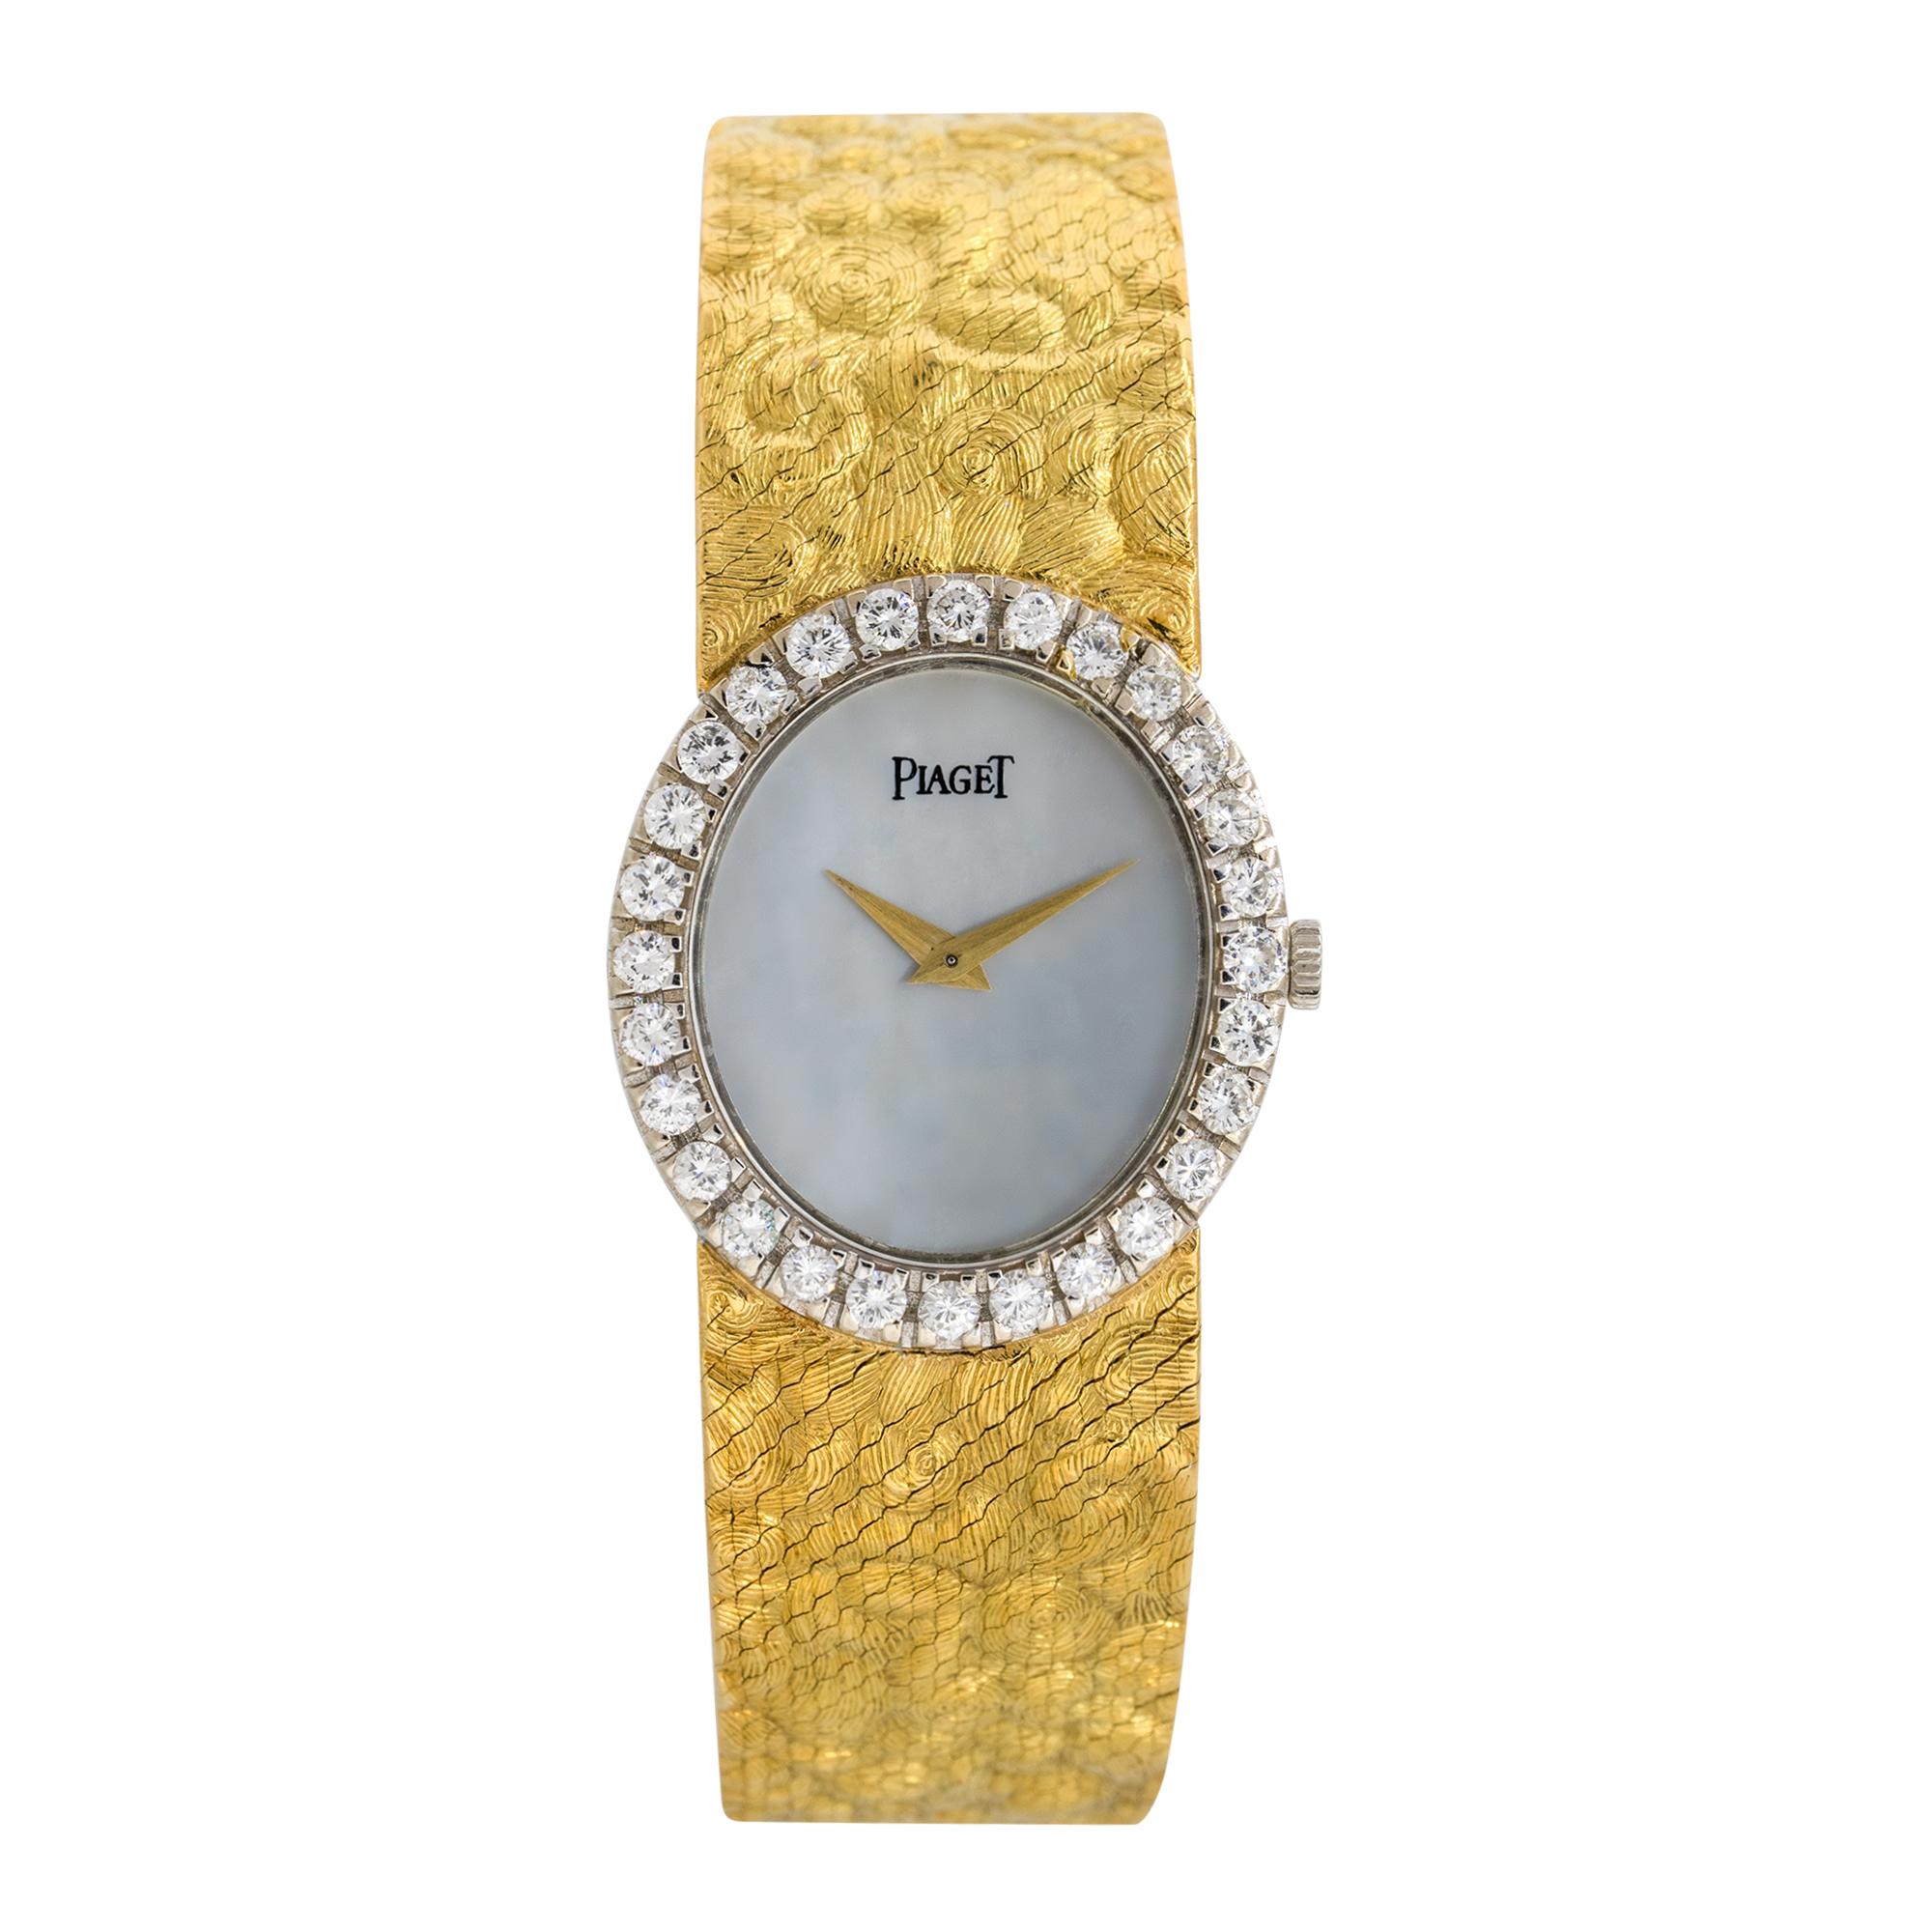 Brand: Piaget
Model: 9814
Case Material: 18k Yellow Gold
Bezel: Round Diamond bezel
Dial: White Mother of Pearl dial with yellow gold hands
Bracelet: 18k yellow gold two piece bracelet
Crystal: Sapphire Crystal
Size: Will fit up to a 6.5